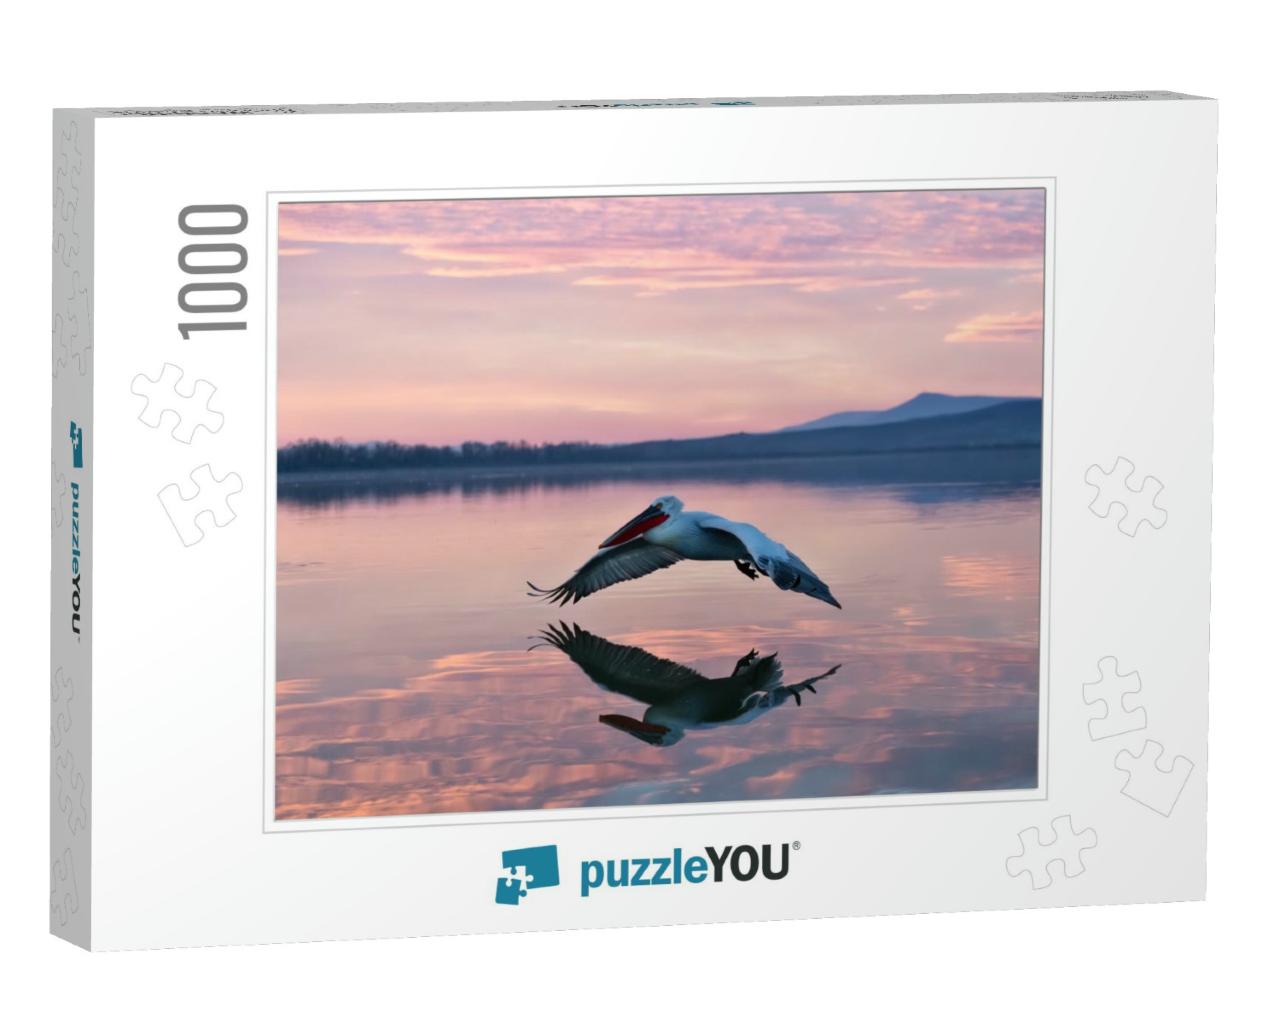 Pelican Flying Over Water in Sunrise, Pelican in Sunrise... Jigsaw Puzzle with 1000 pieces